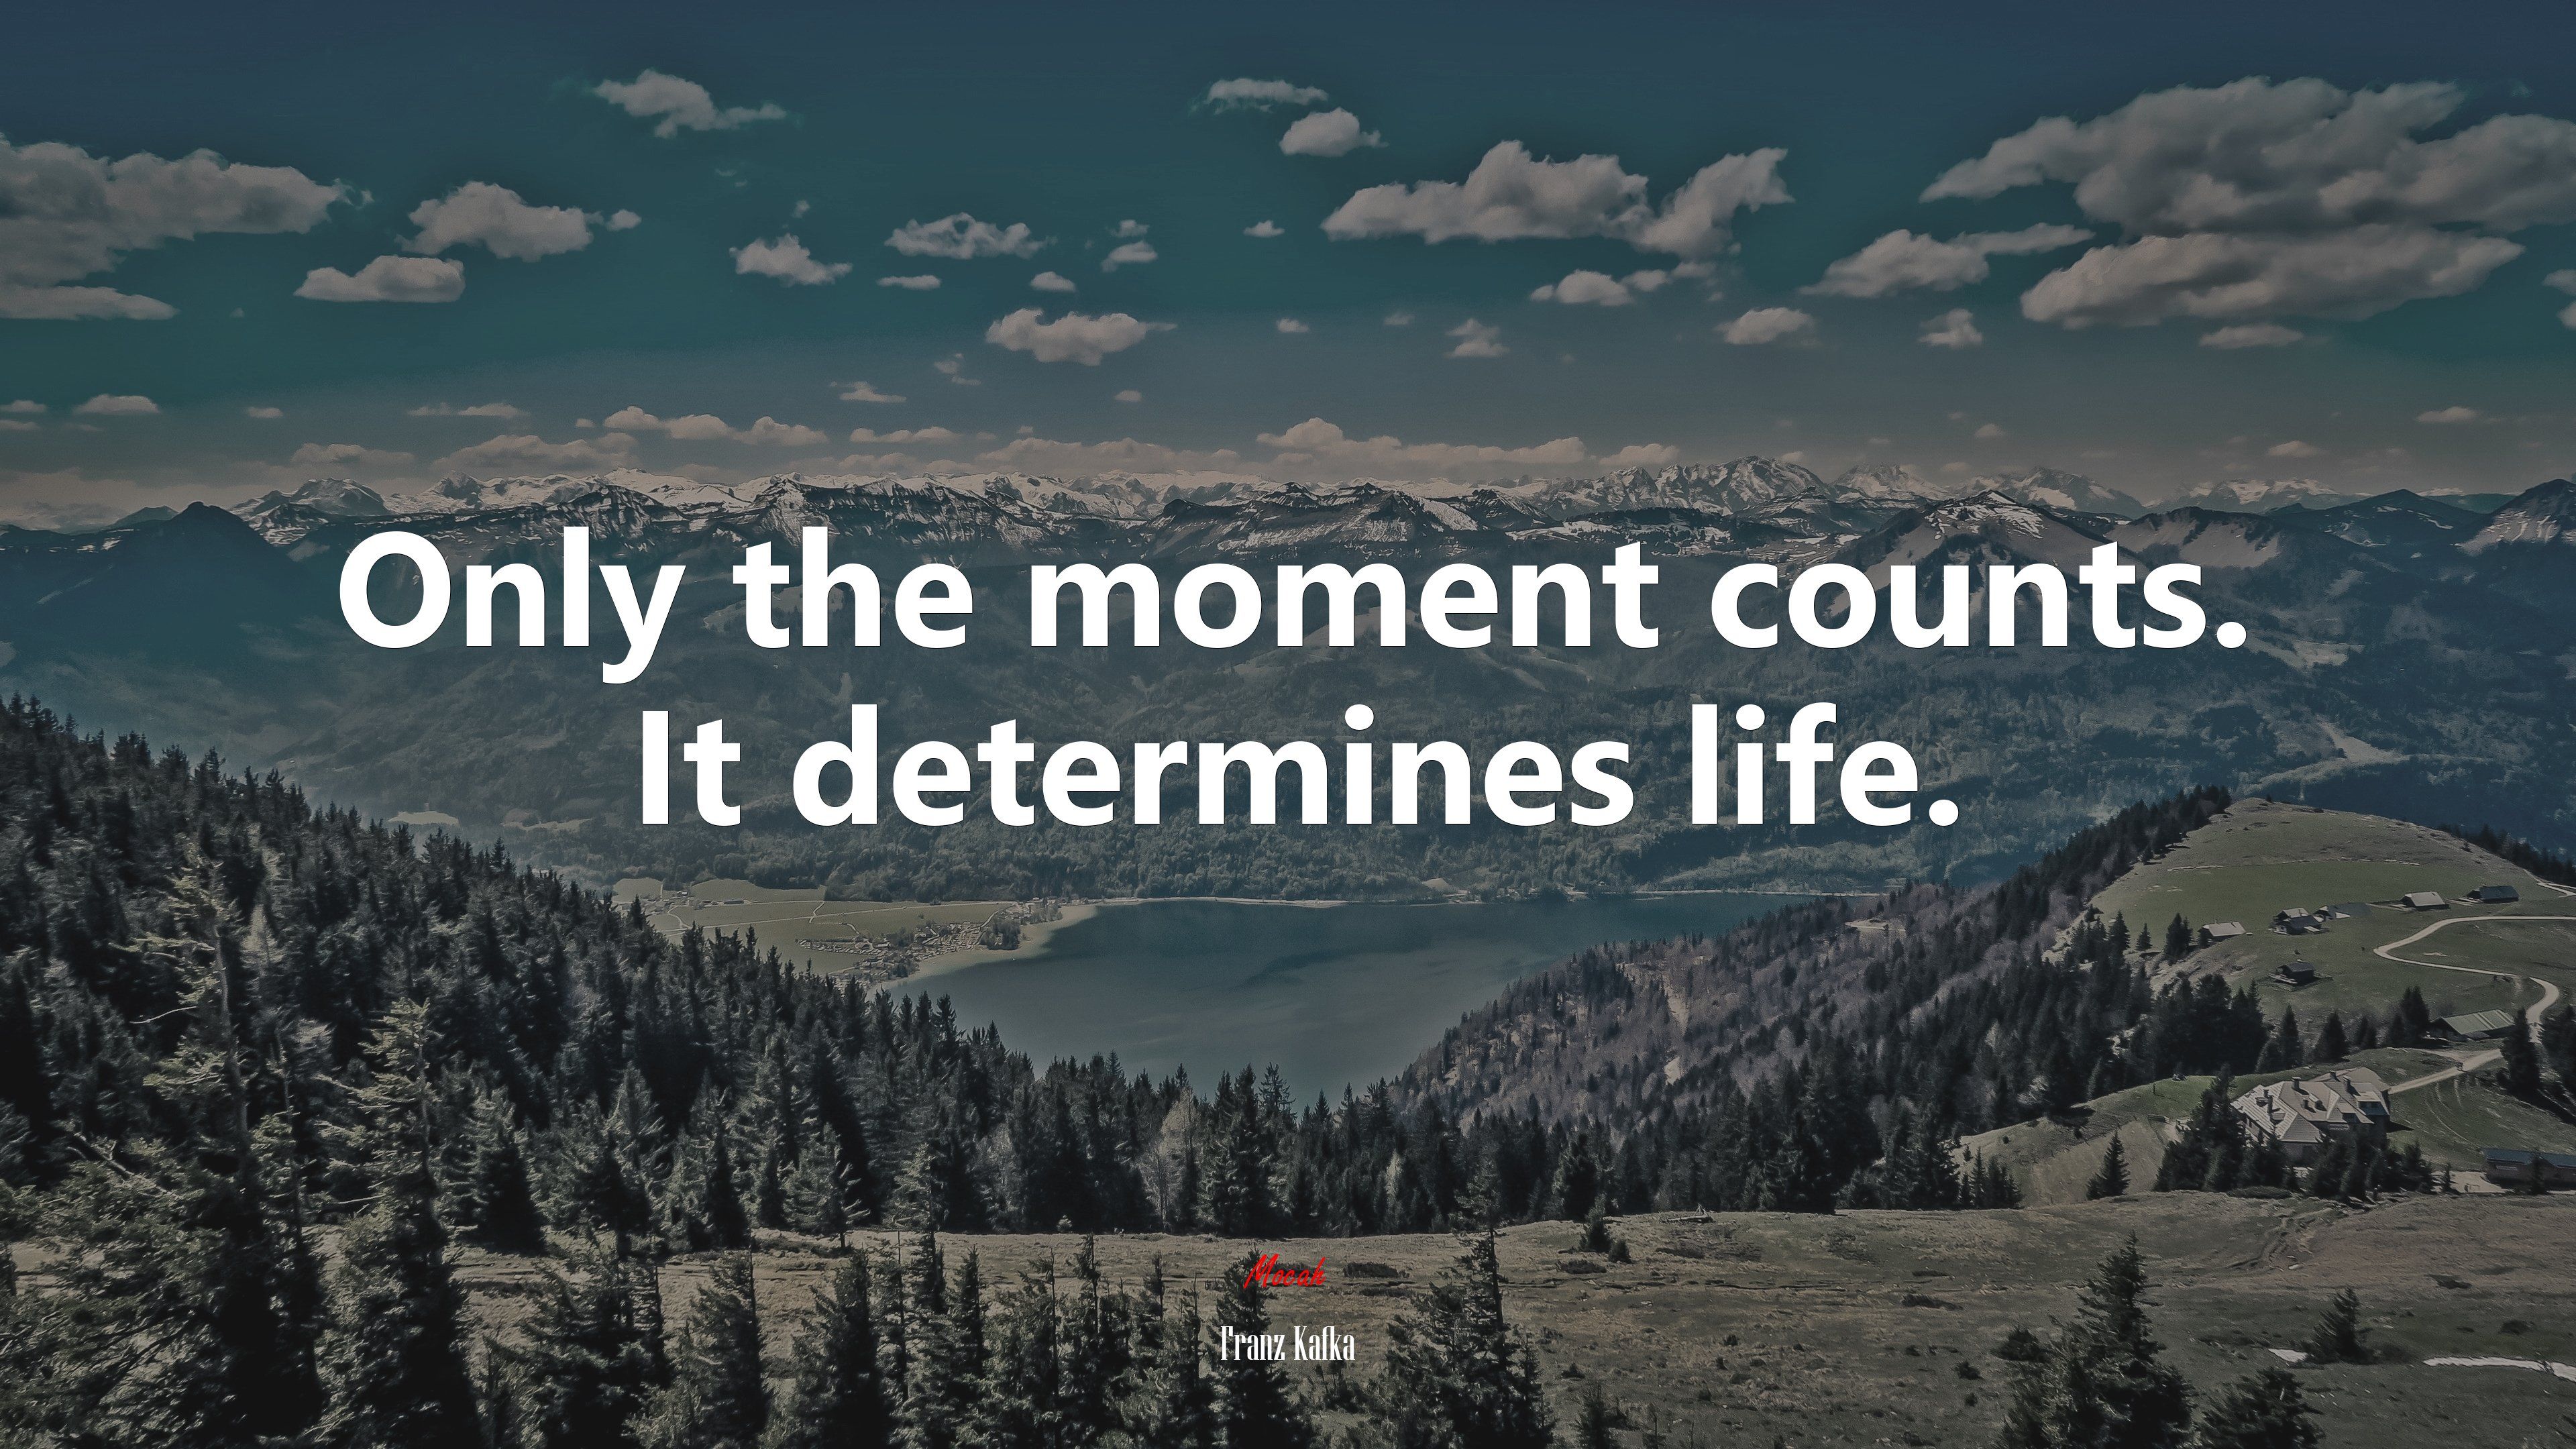 Only the moment counts. It determines life. Franz Kafka quote, 4k wallpaper